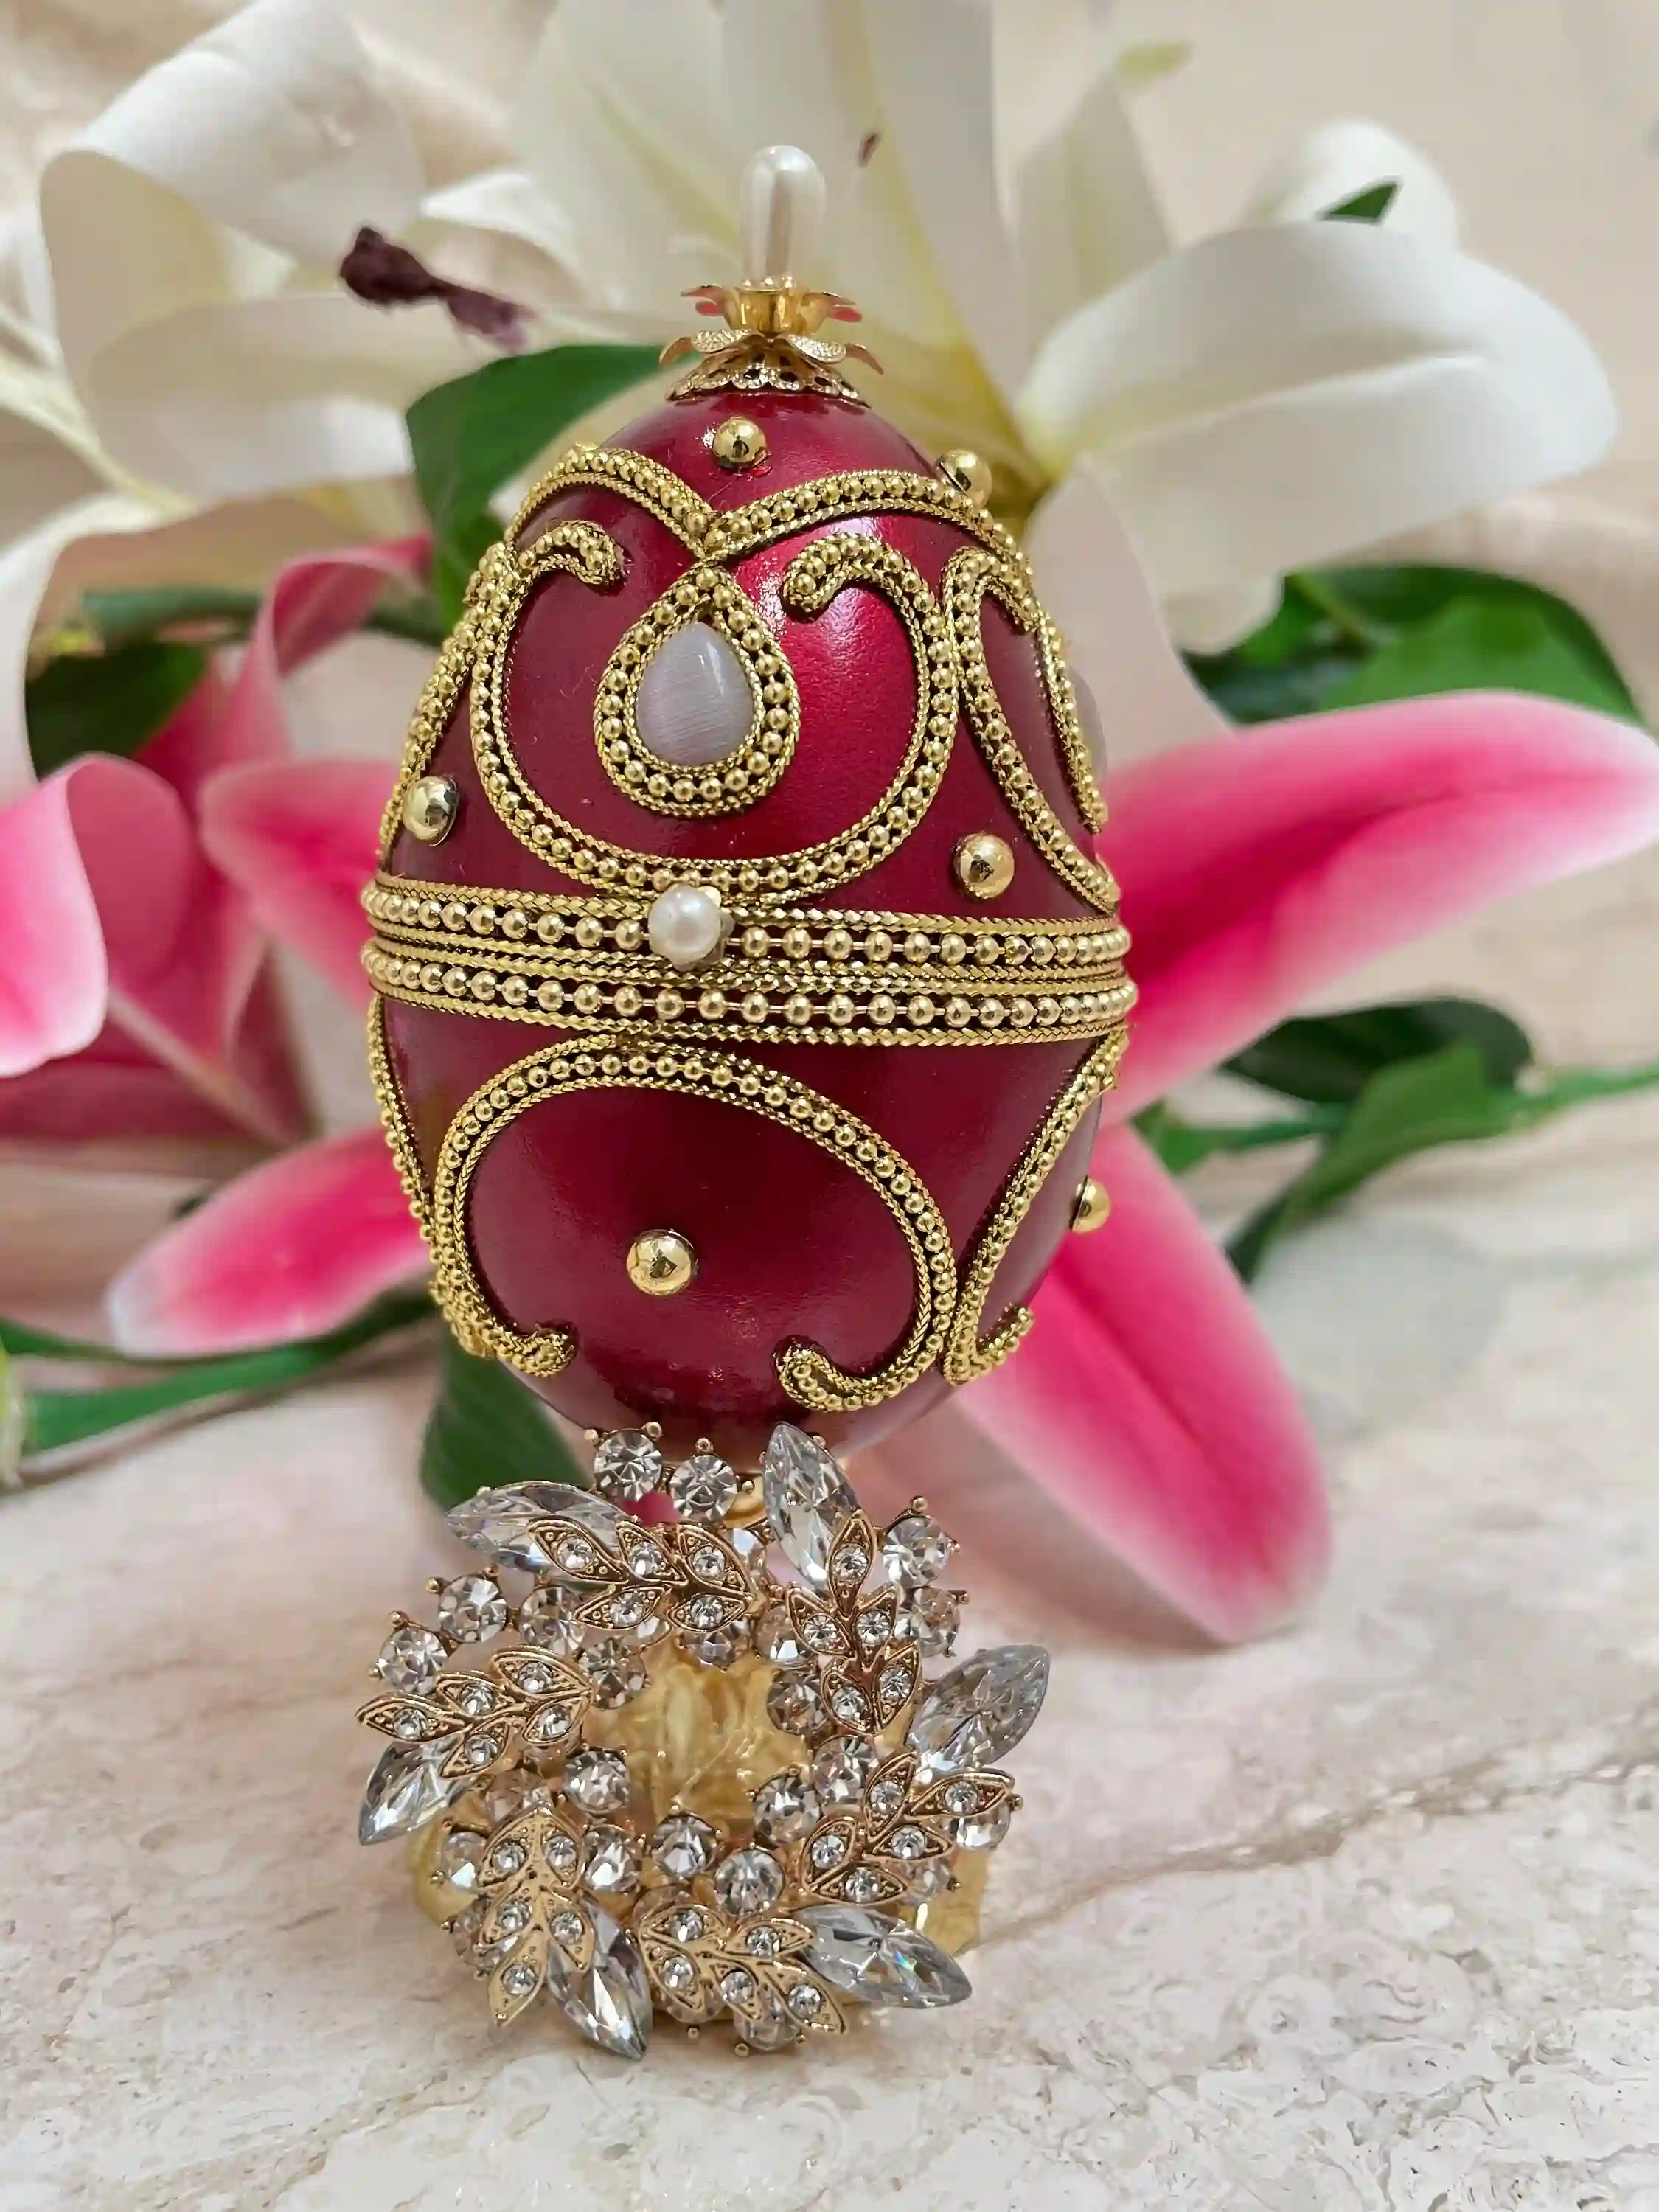 1992 Antique Wreath Faberge style Easter egg Red Faberge Pendant SET One Of A Kind -HANDCARVED Natural Faberge Egg - 24k GOLD - Gift for her 